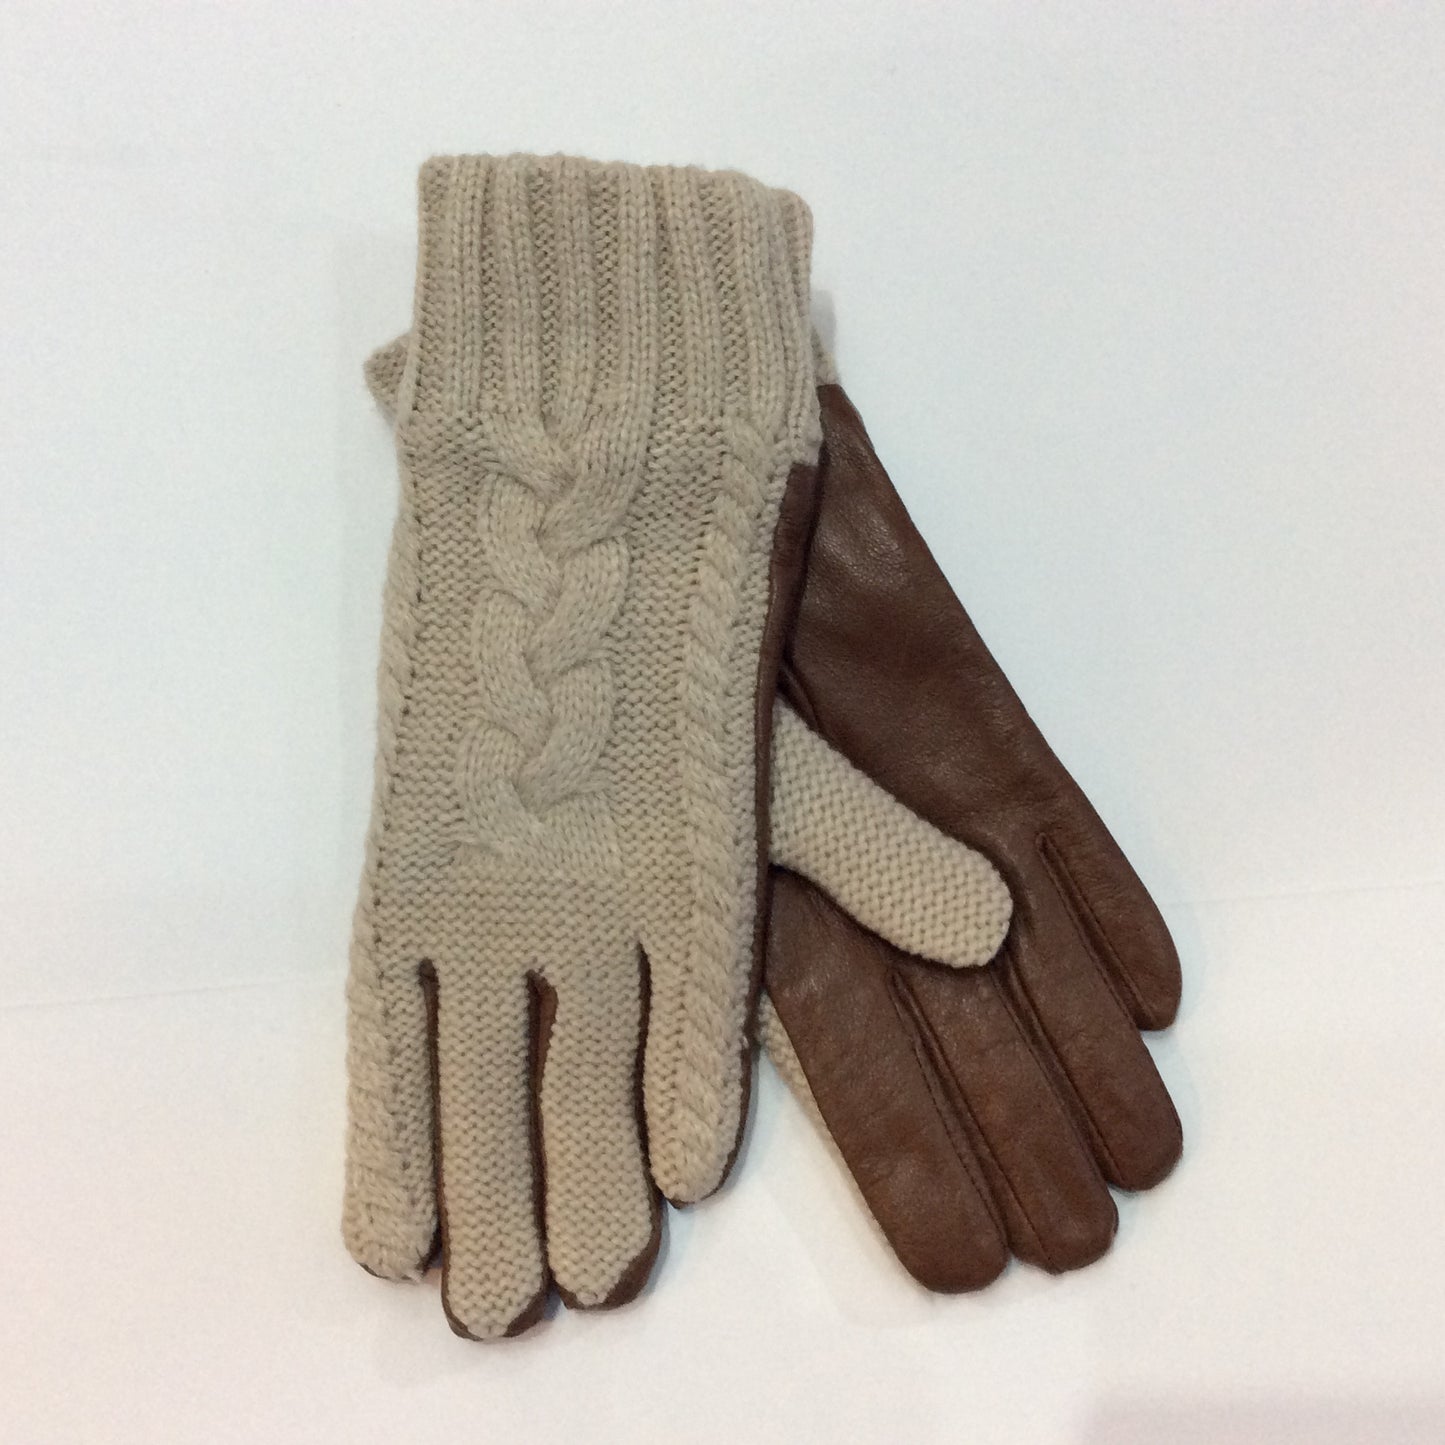 Cable knit tan gloves with leather palm